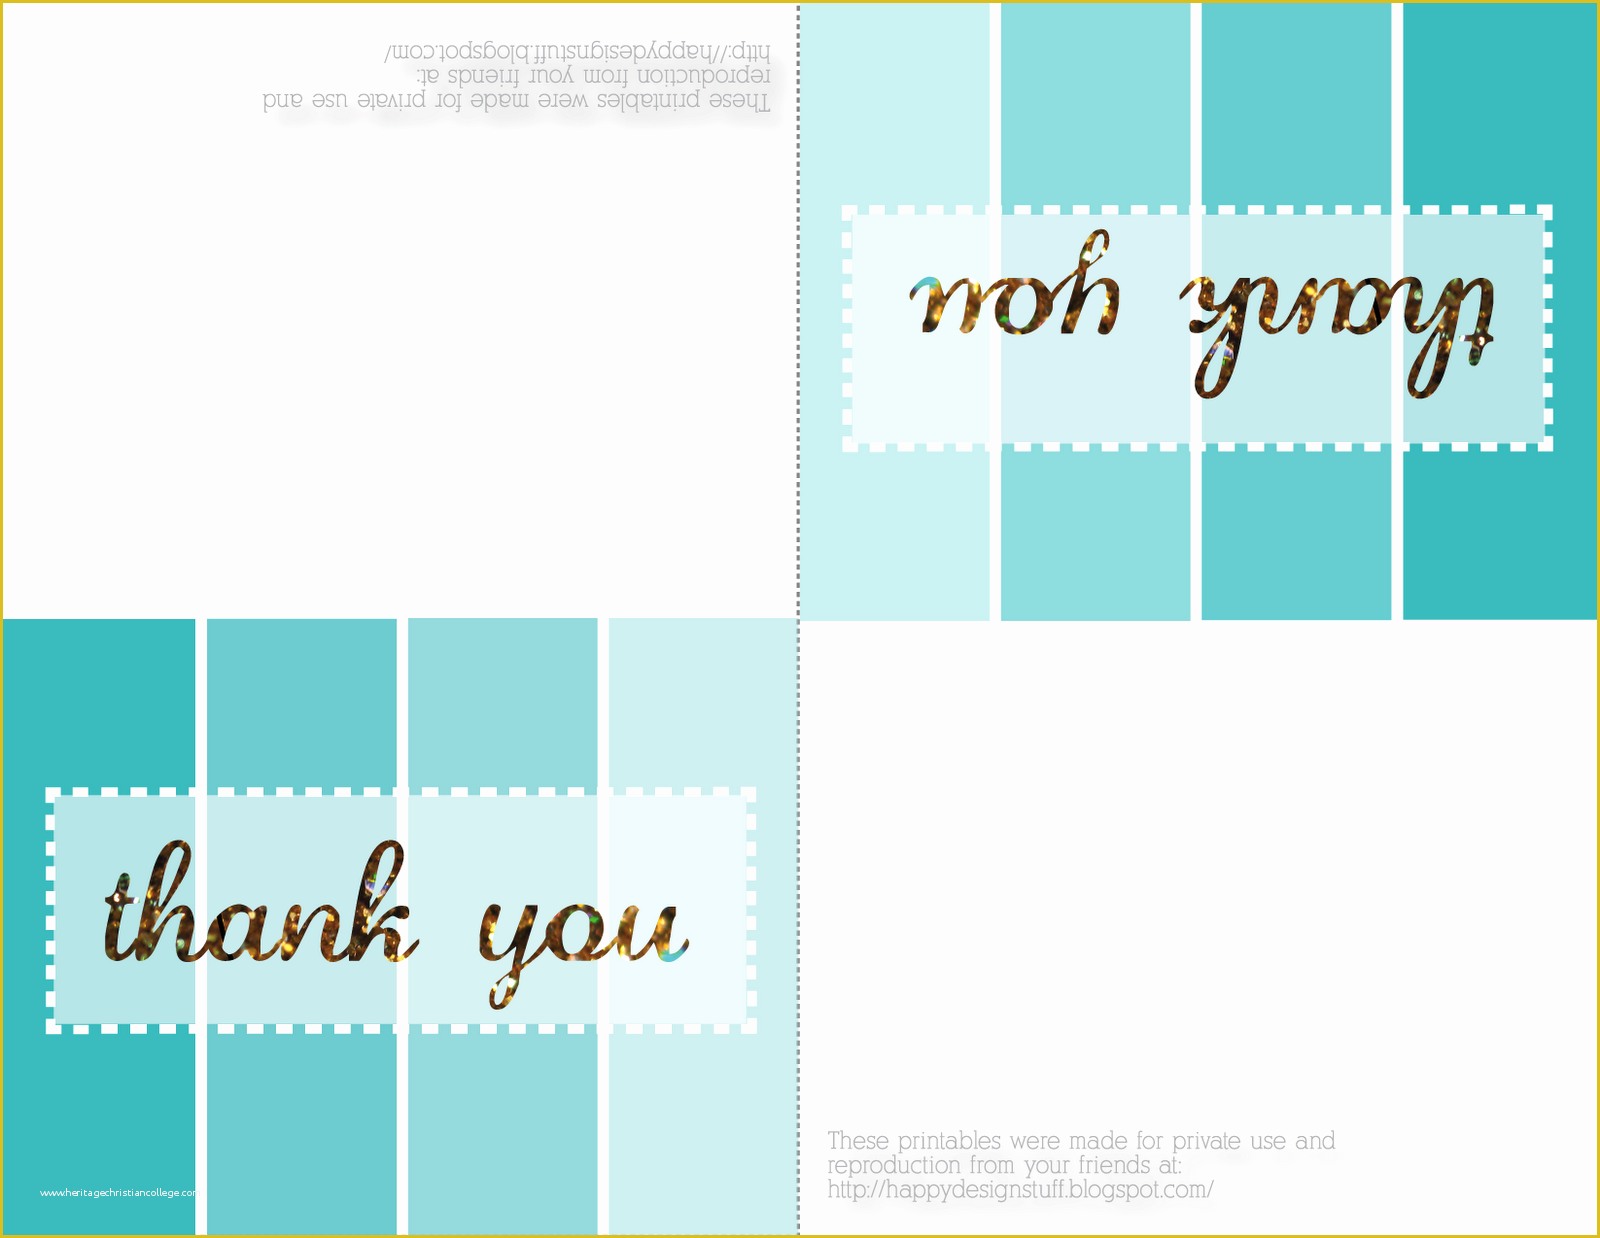 Free Thank You Card Template Word Of Happy Design Stuff Free Printable Friday Thank You Cards